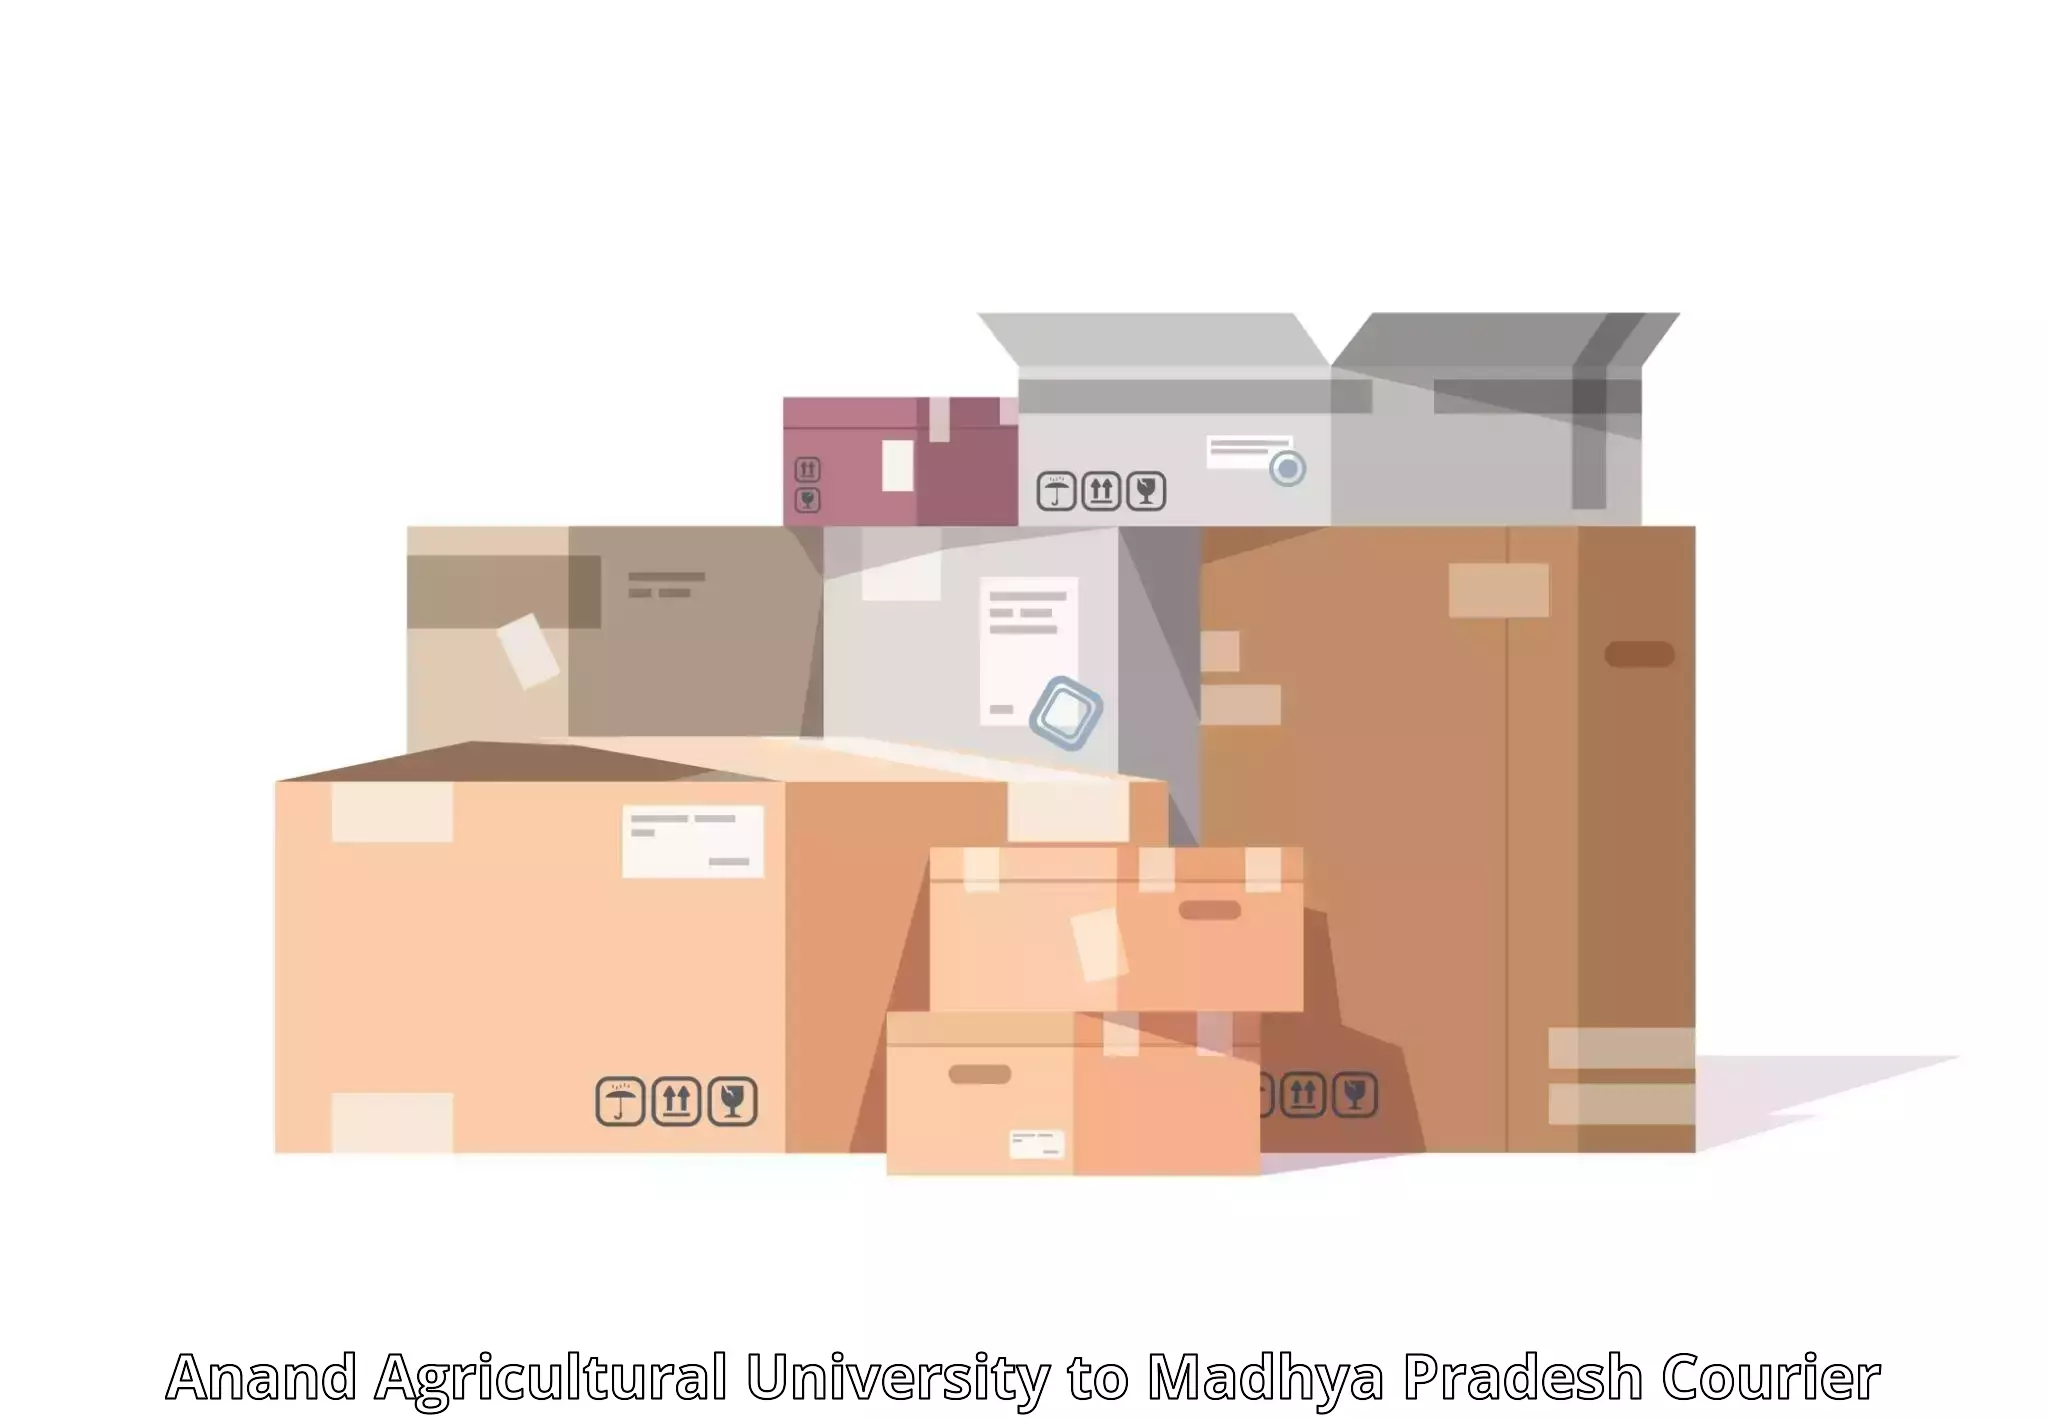 Affordable parcel rates Anand Agricultural University to Niwari